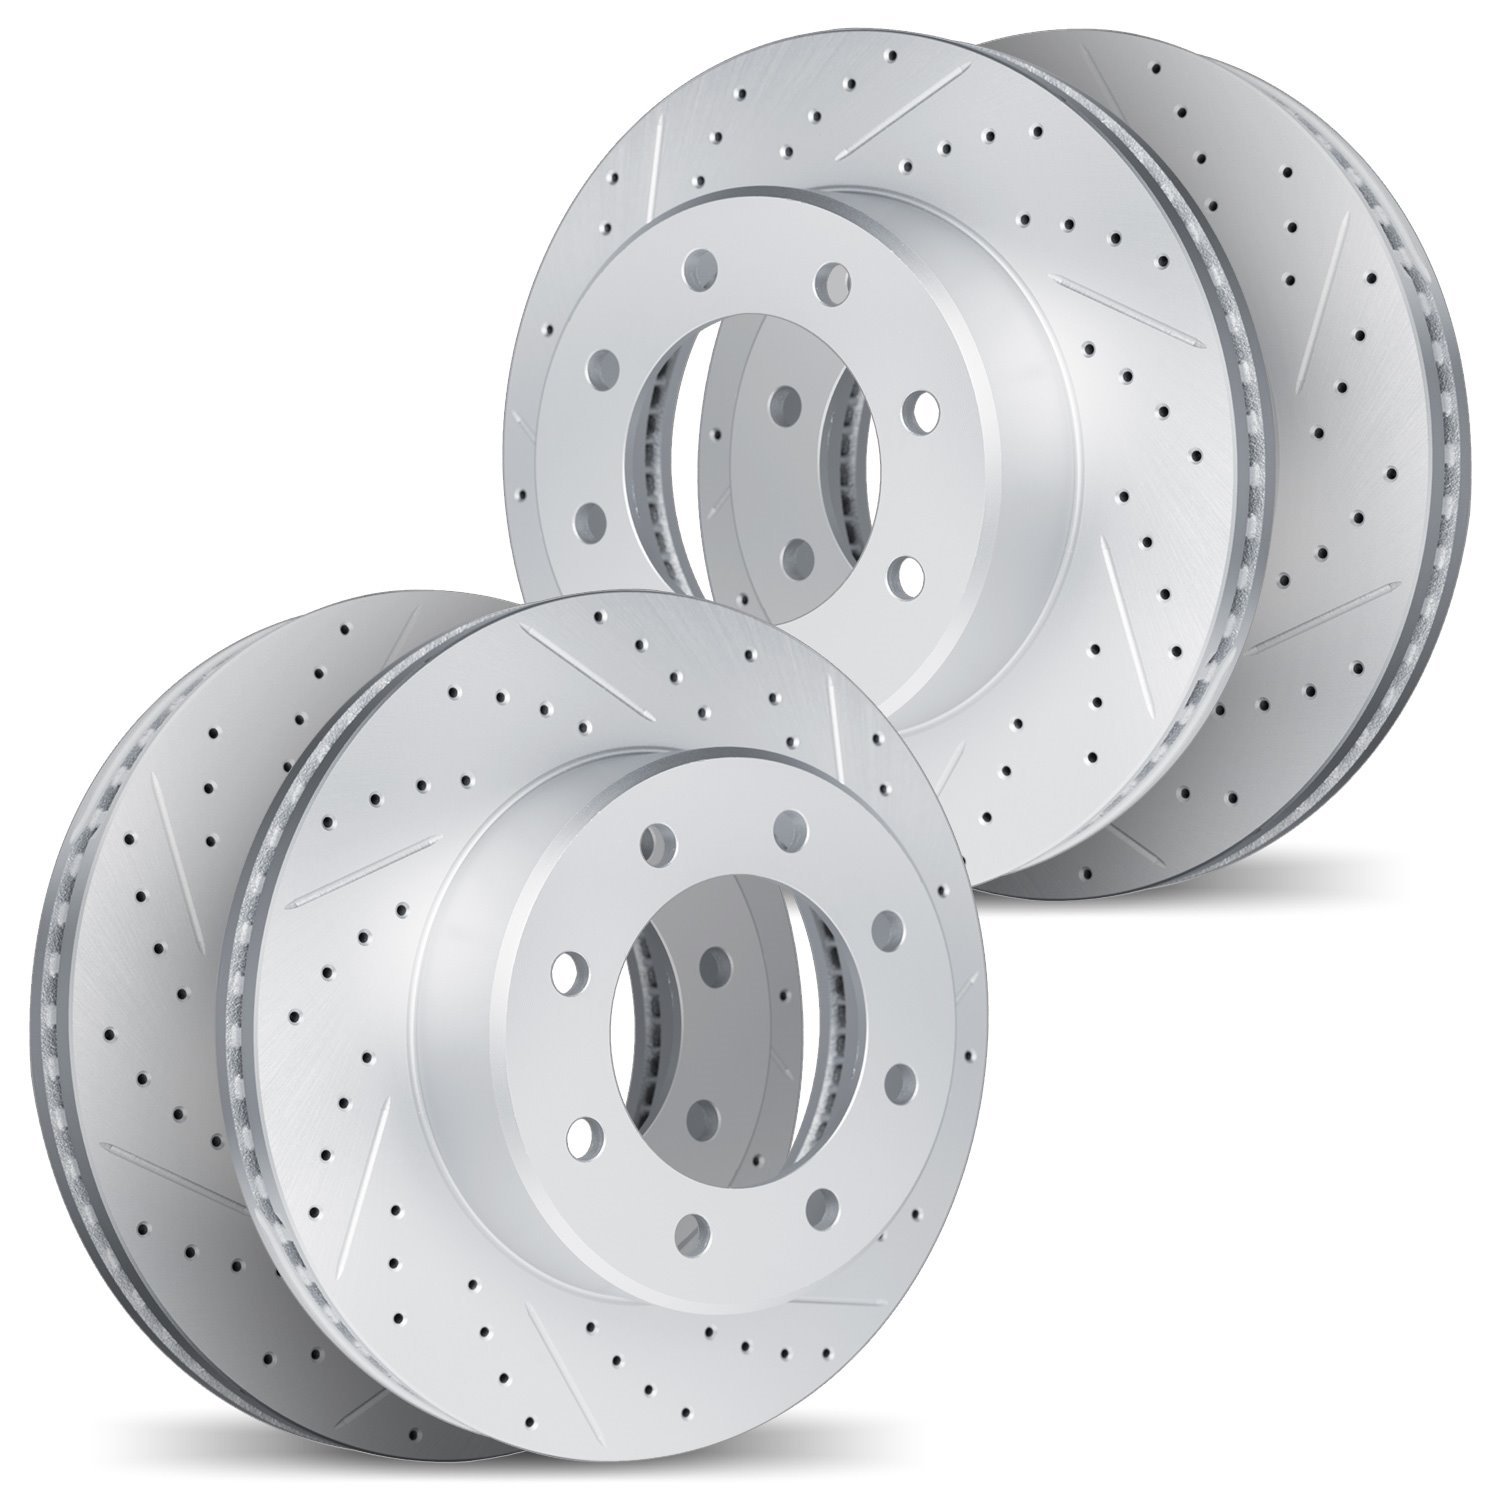 2004-54120 Geoperformance Drilled/Slotted Brake Rotors, Fits Select Ford/Lincoln/Mercury/Mazda, Position: Front and Rear